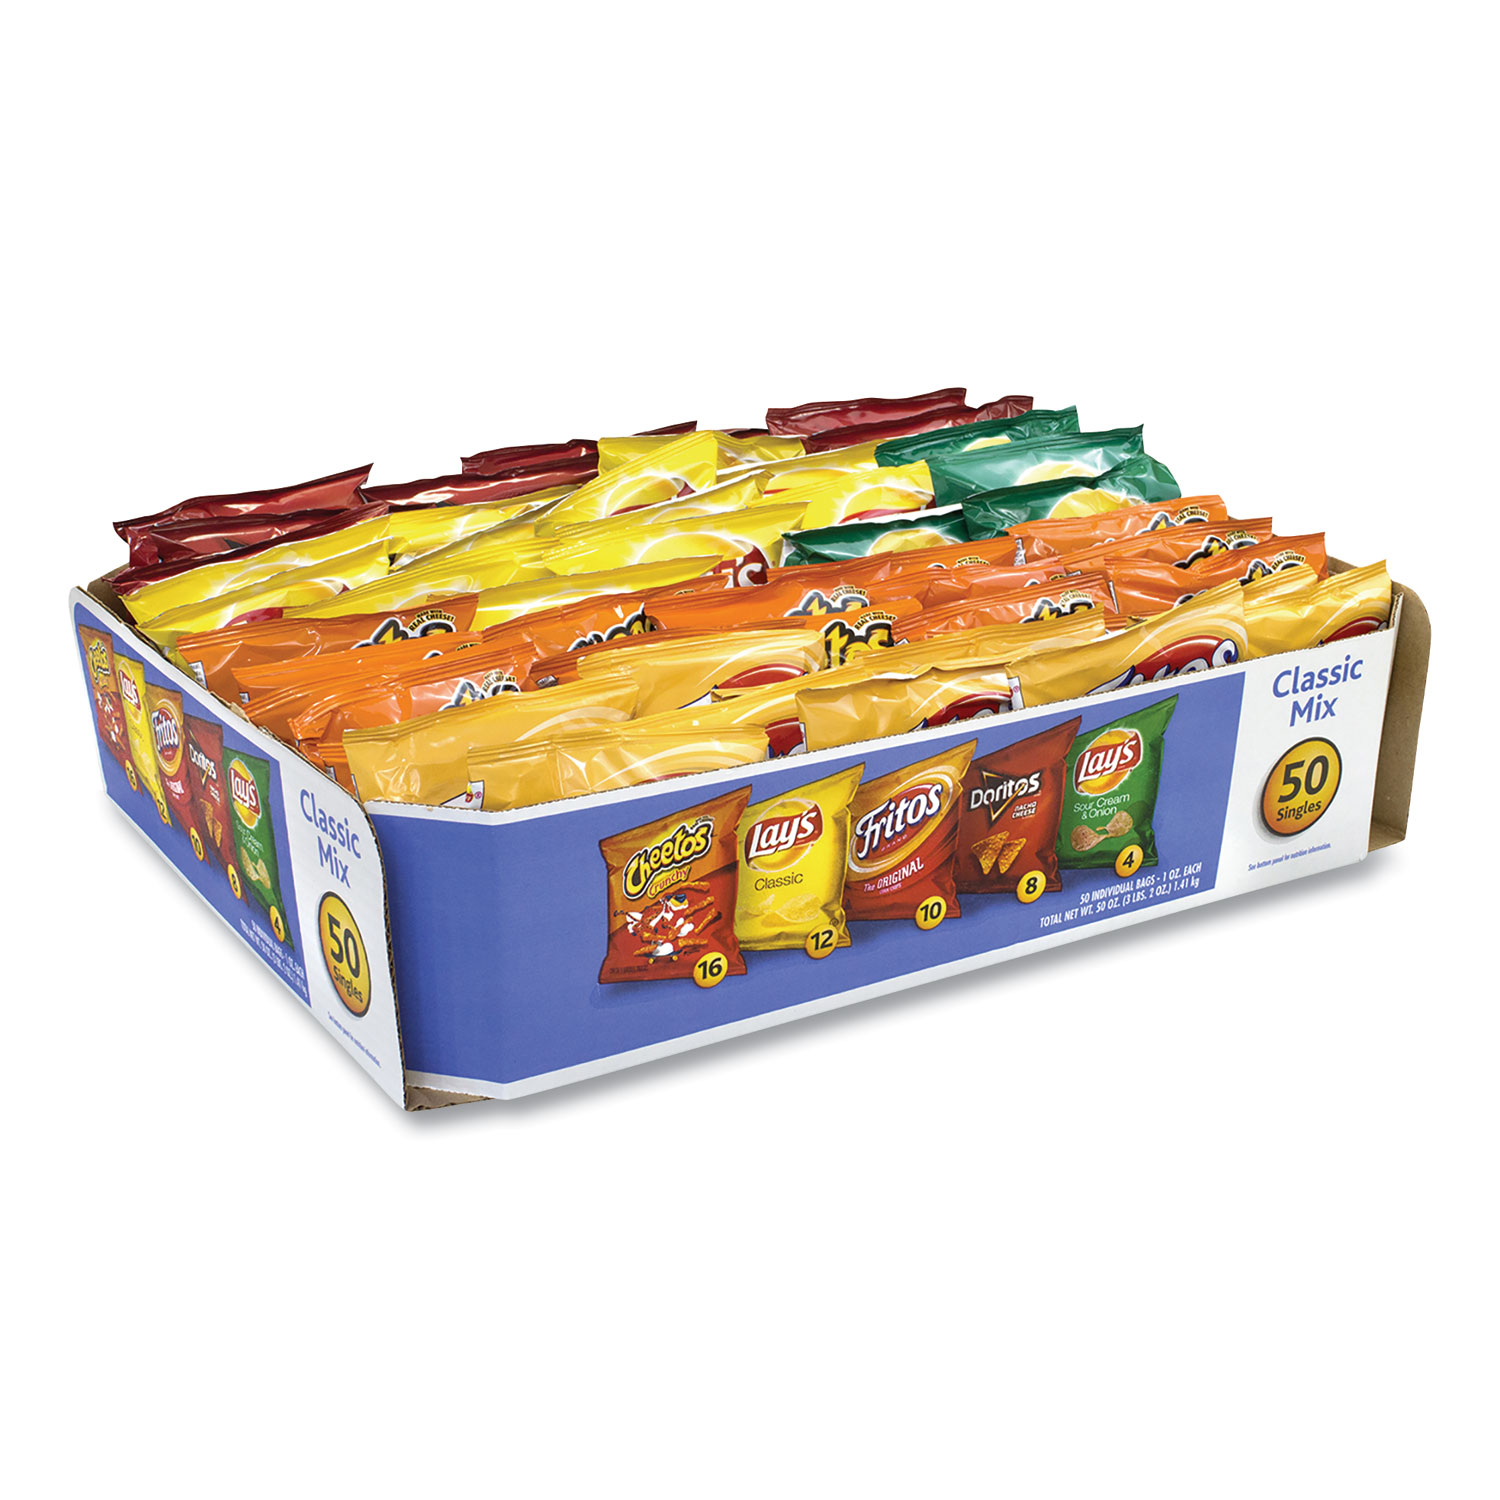  Frito-Lay 25413 Potato Chips Bags Variety Pack, Assorted Flavors, 1 oz Bag, 50 Bags/Carton, Free Delivery in 1-4 Business Days (GRR22000403) 